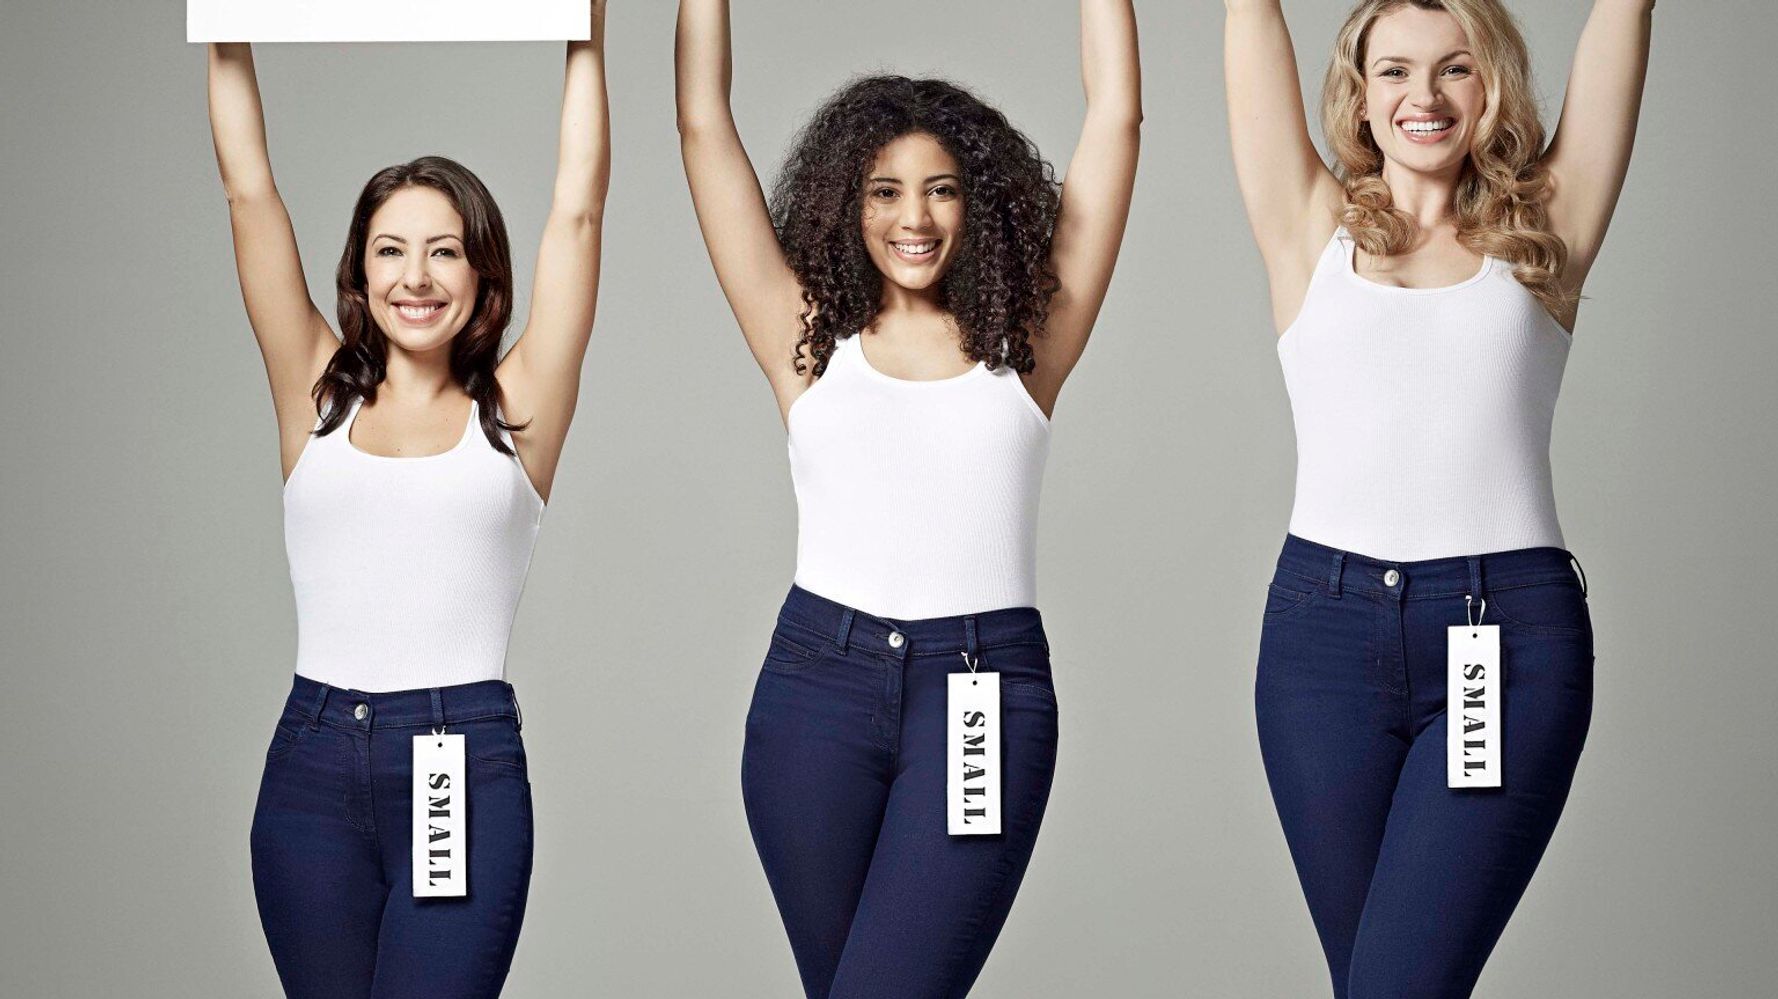 What are Wonderfit jeans and how will